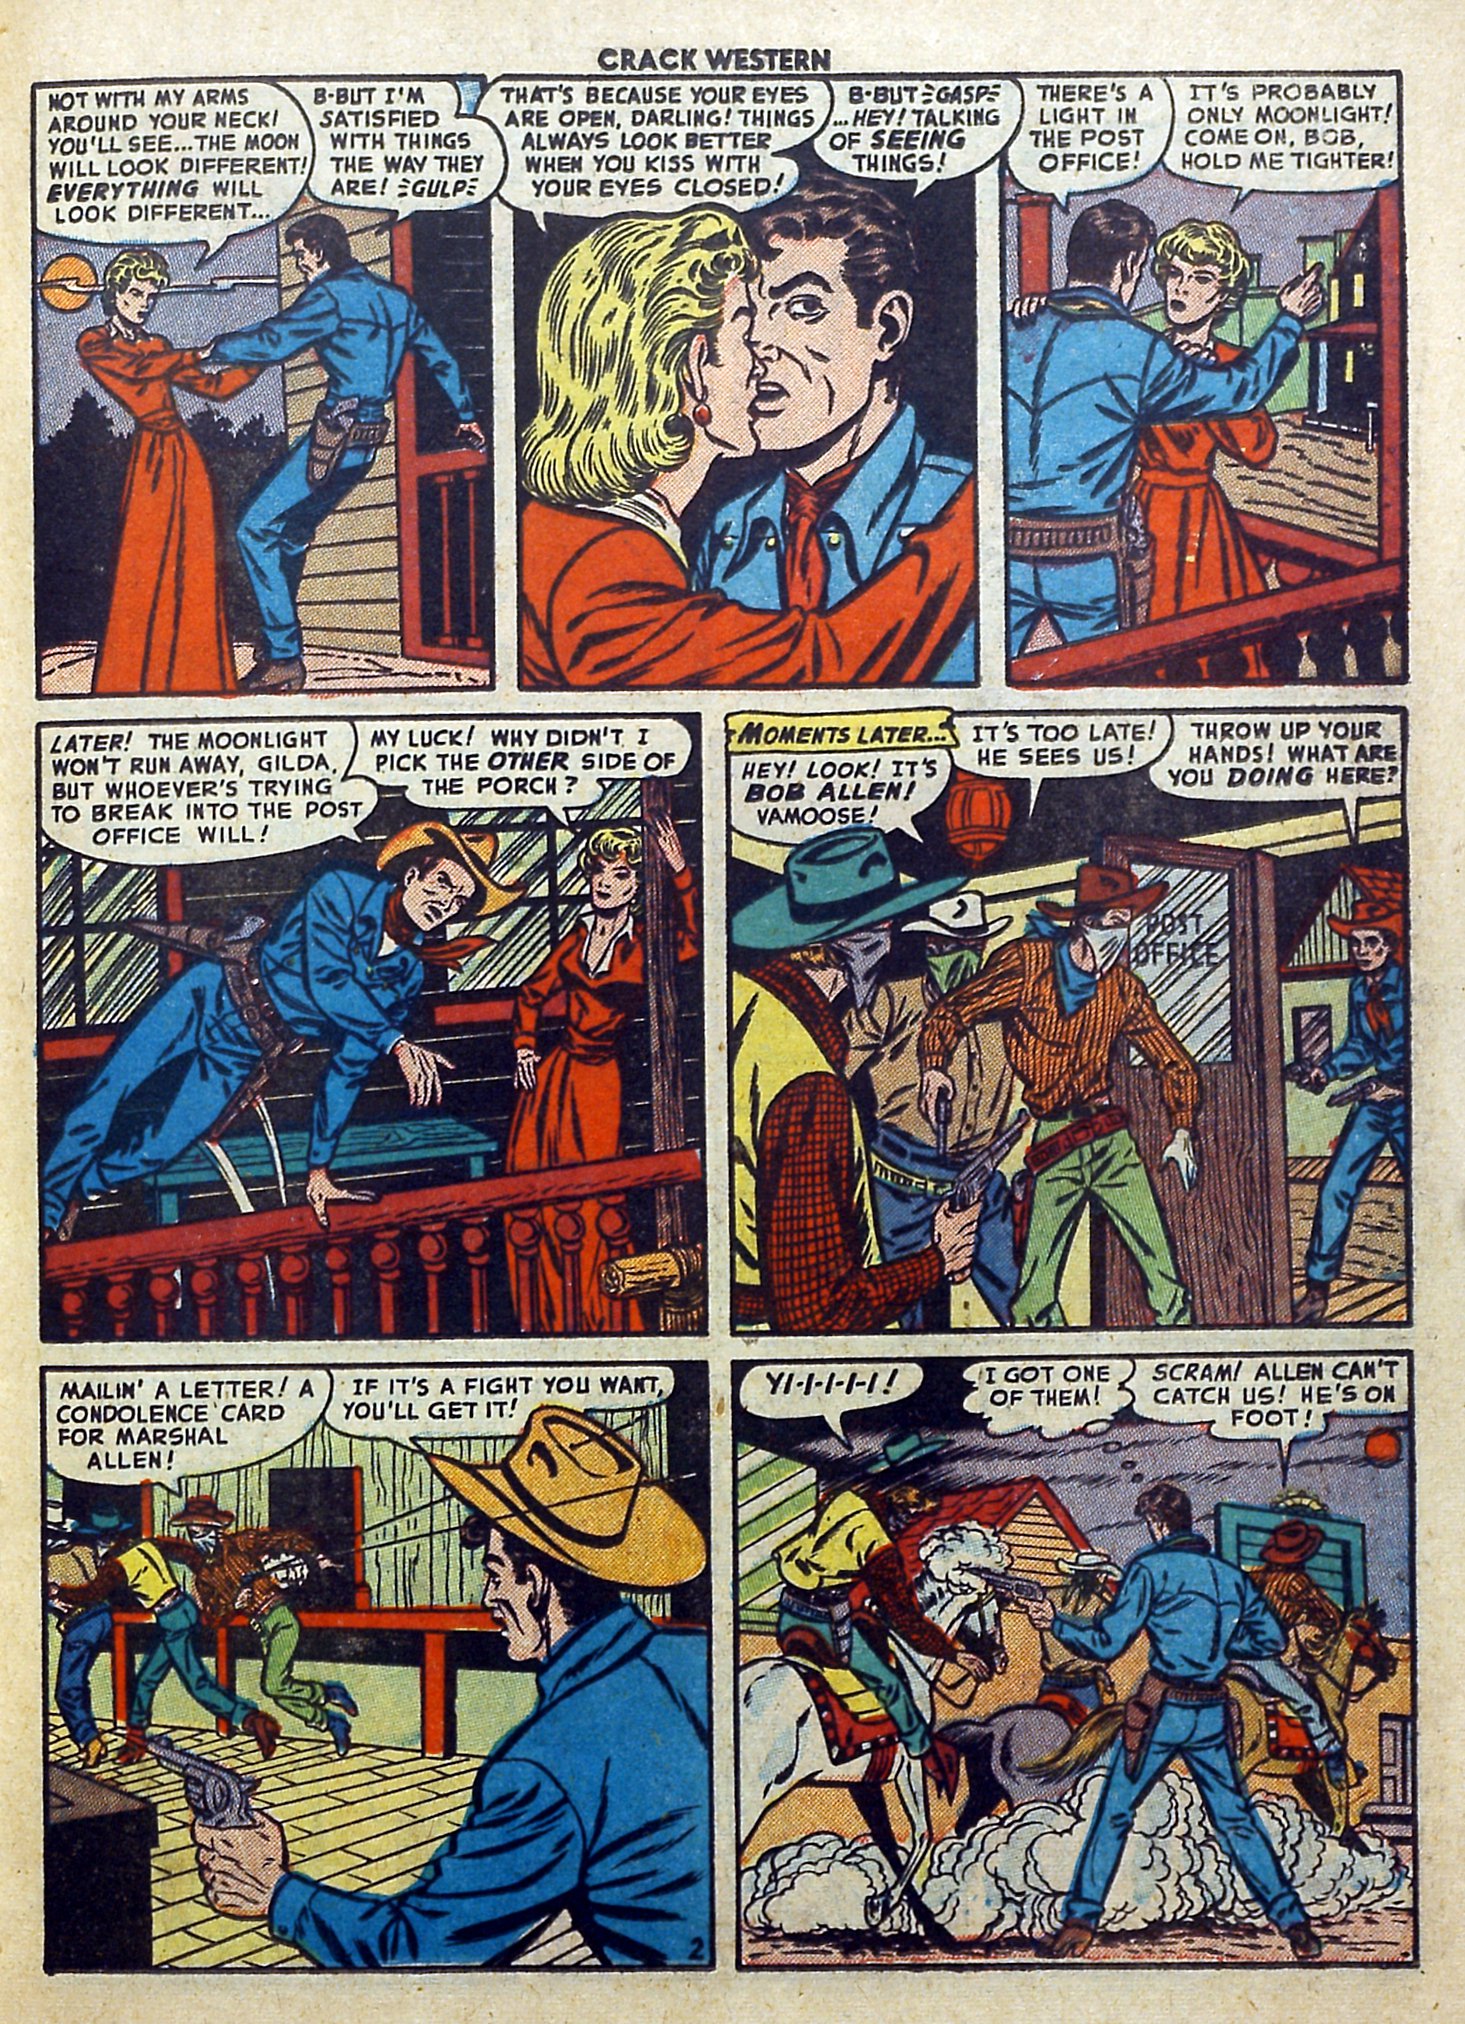 Read online Crack Western comic -  Issue #79 - 19